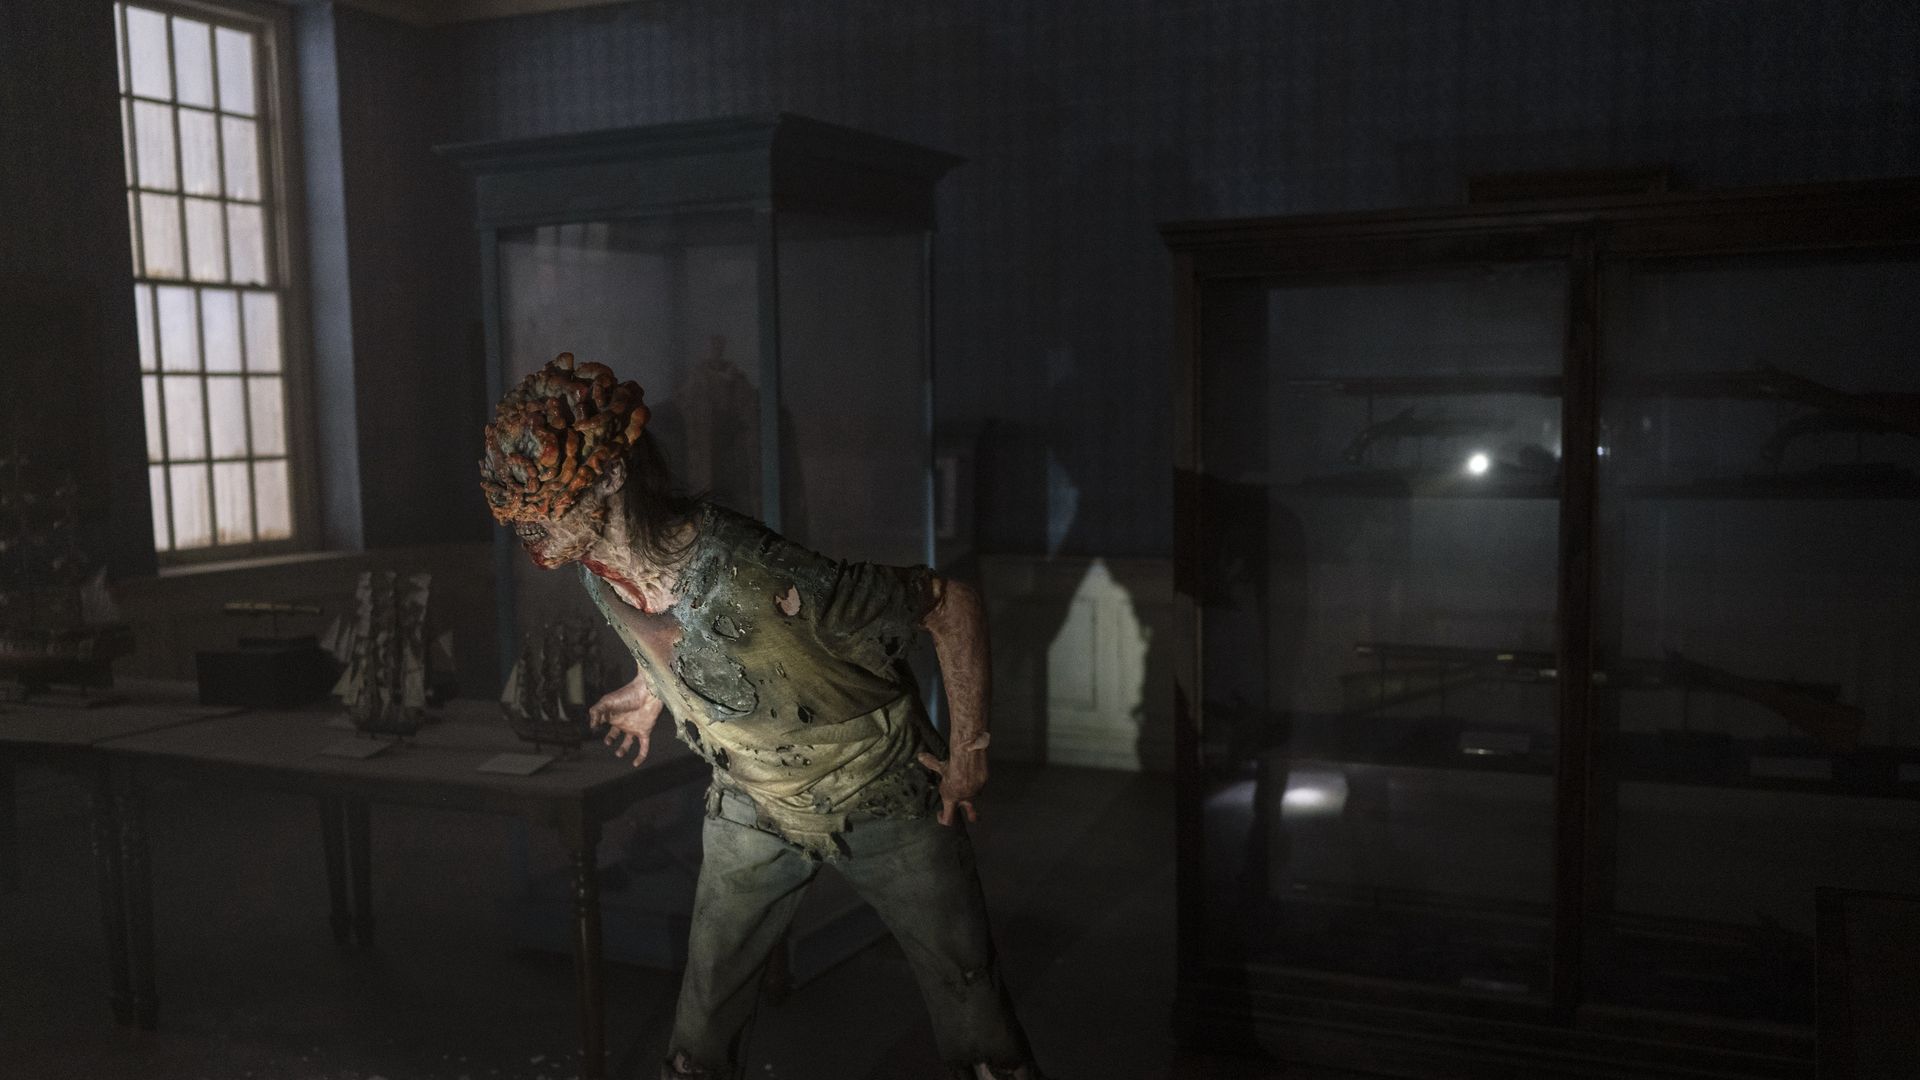 The Last of Us: Every Type of Infected Zombie, Explained